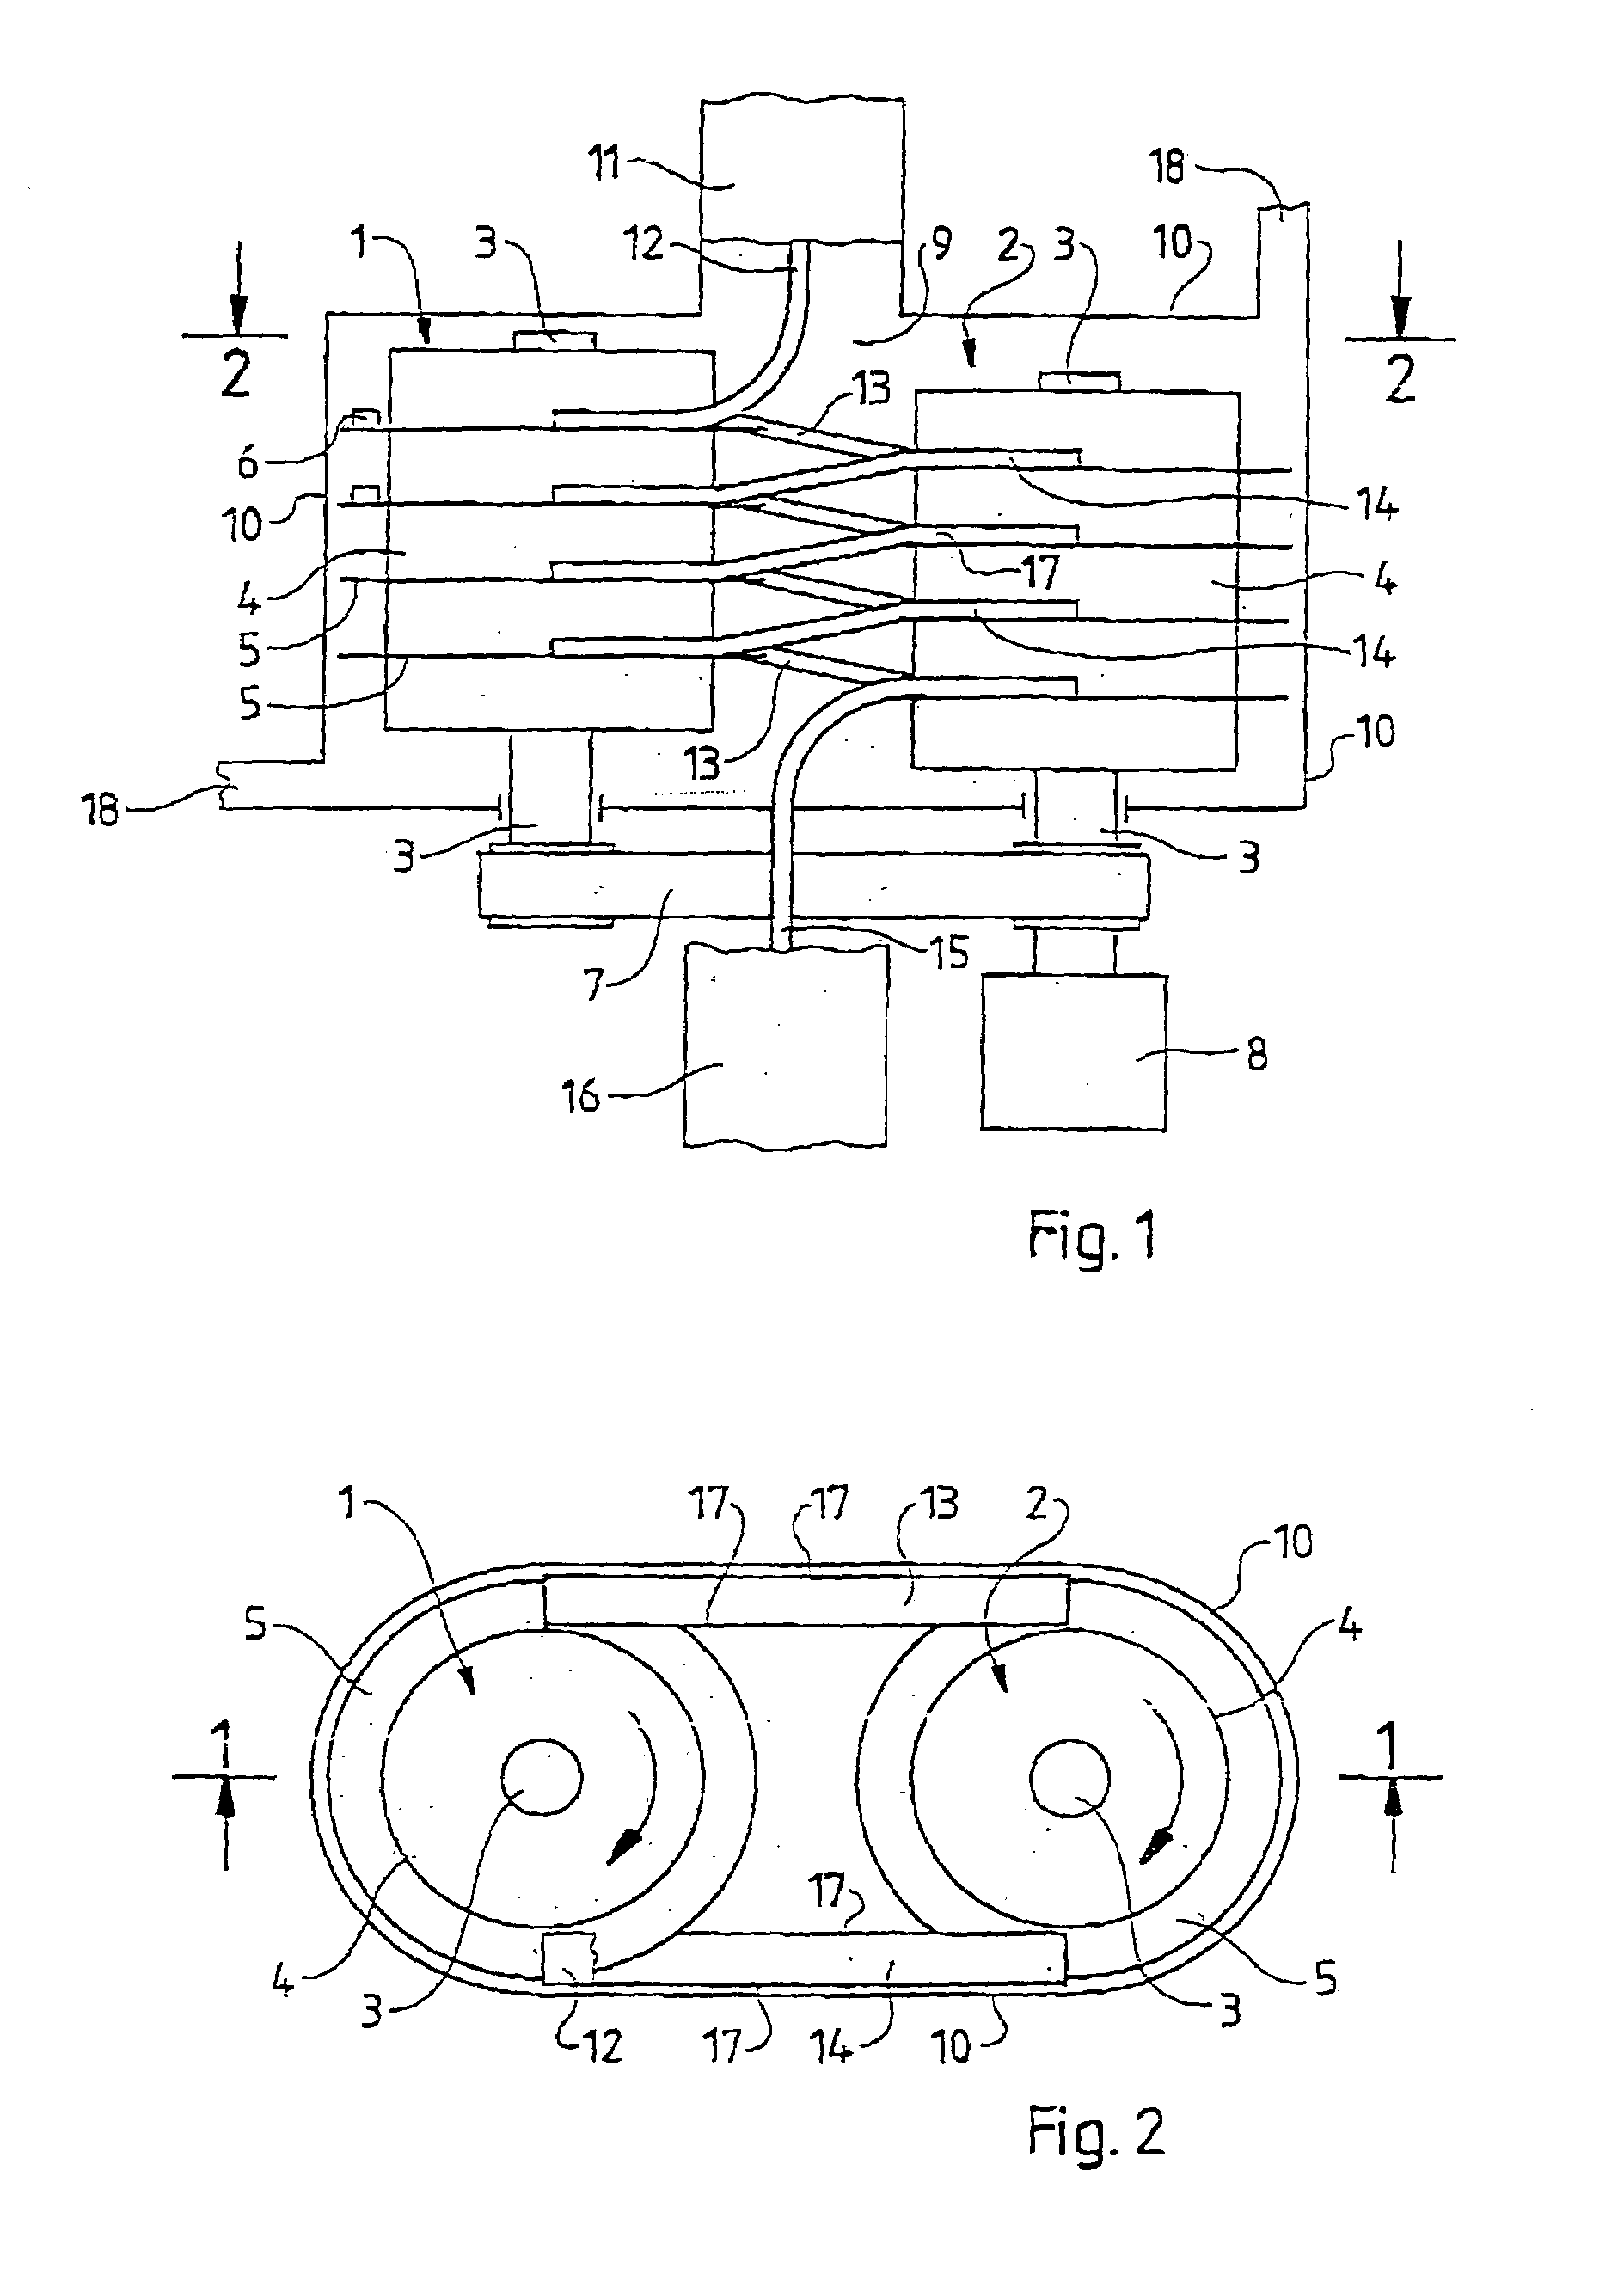 Beverage bottling plant and method for filling bottles including a treatment device for beverage container caps